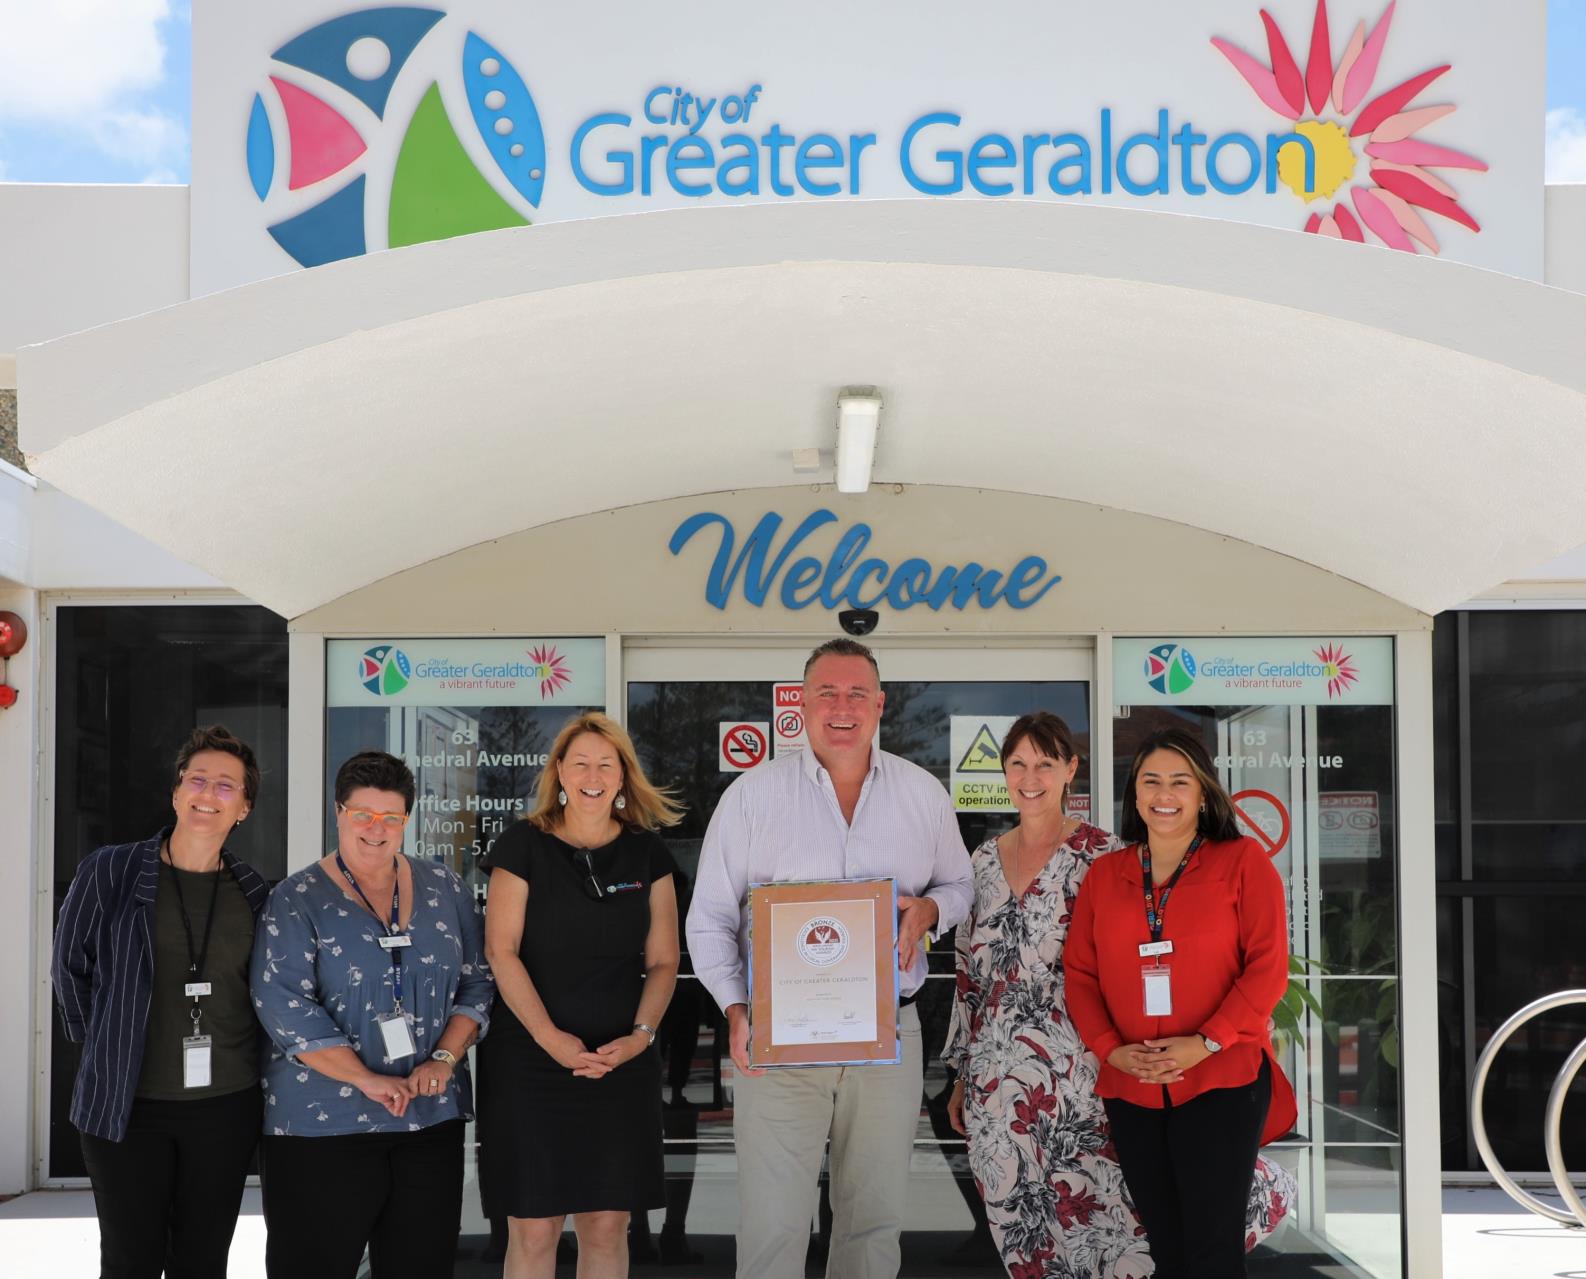 City of Greater Geraldton Mayor Shane Van Styn pictured with City staff Communications Officer – Digital Nicole Roberts, Communications Officer – Design Keely Grieve, Manager Libraries, Heritage and Gallery Trudi Cornish, Manager Strategic Planning and Economic Development Trish Palmonari and A/Coordinator Communications Tully Gray celebrating the win. 